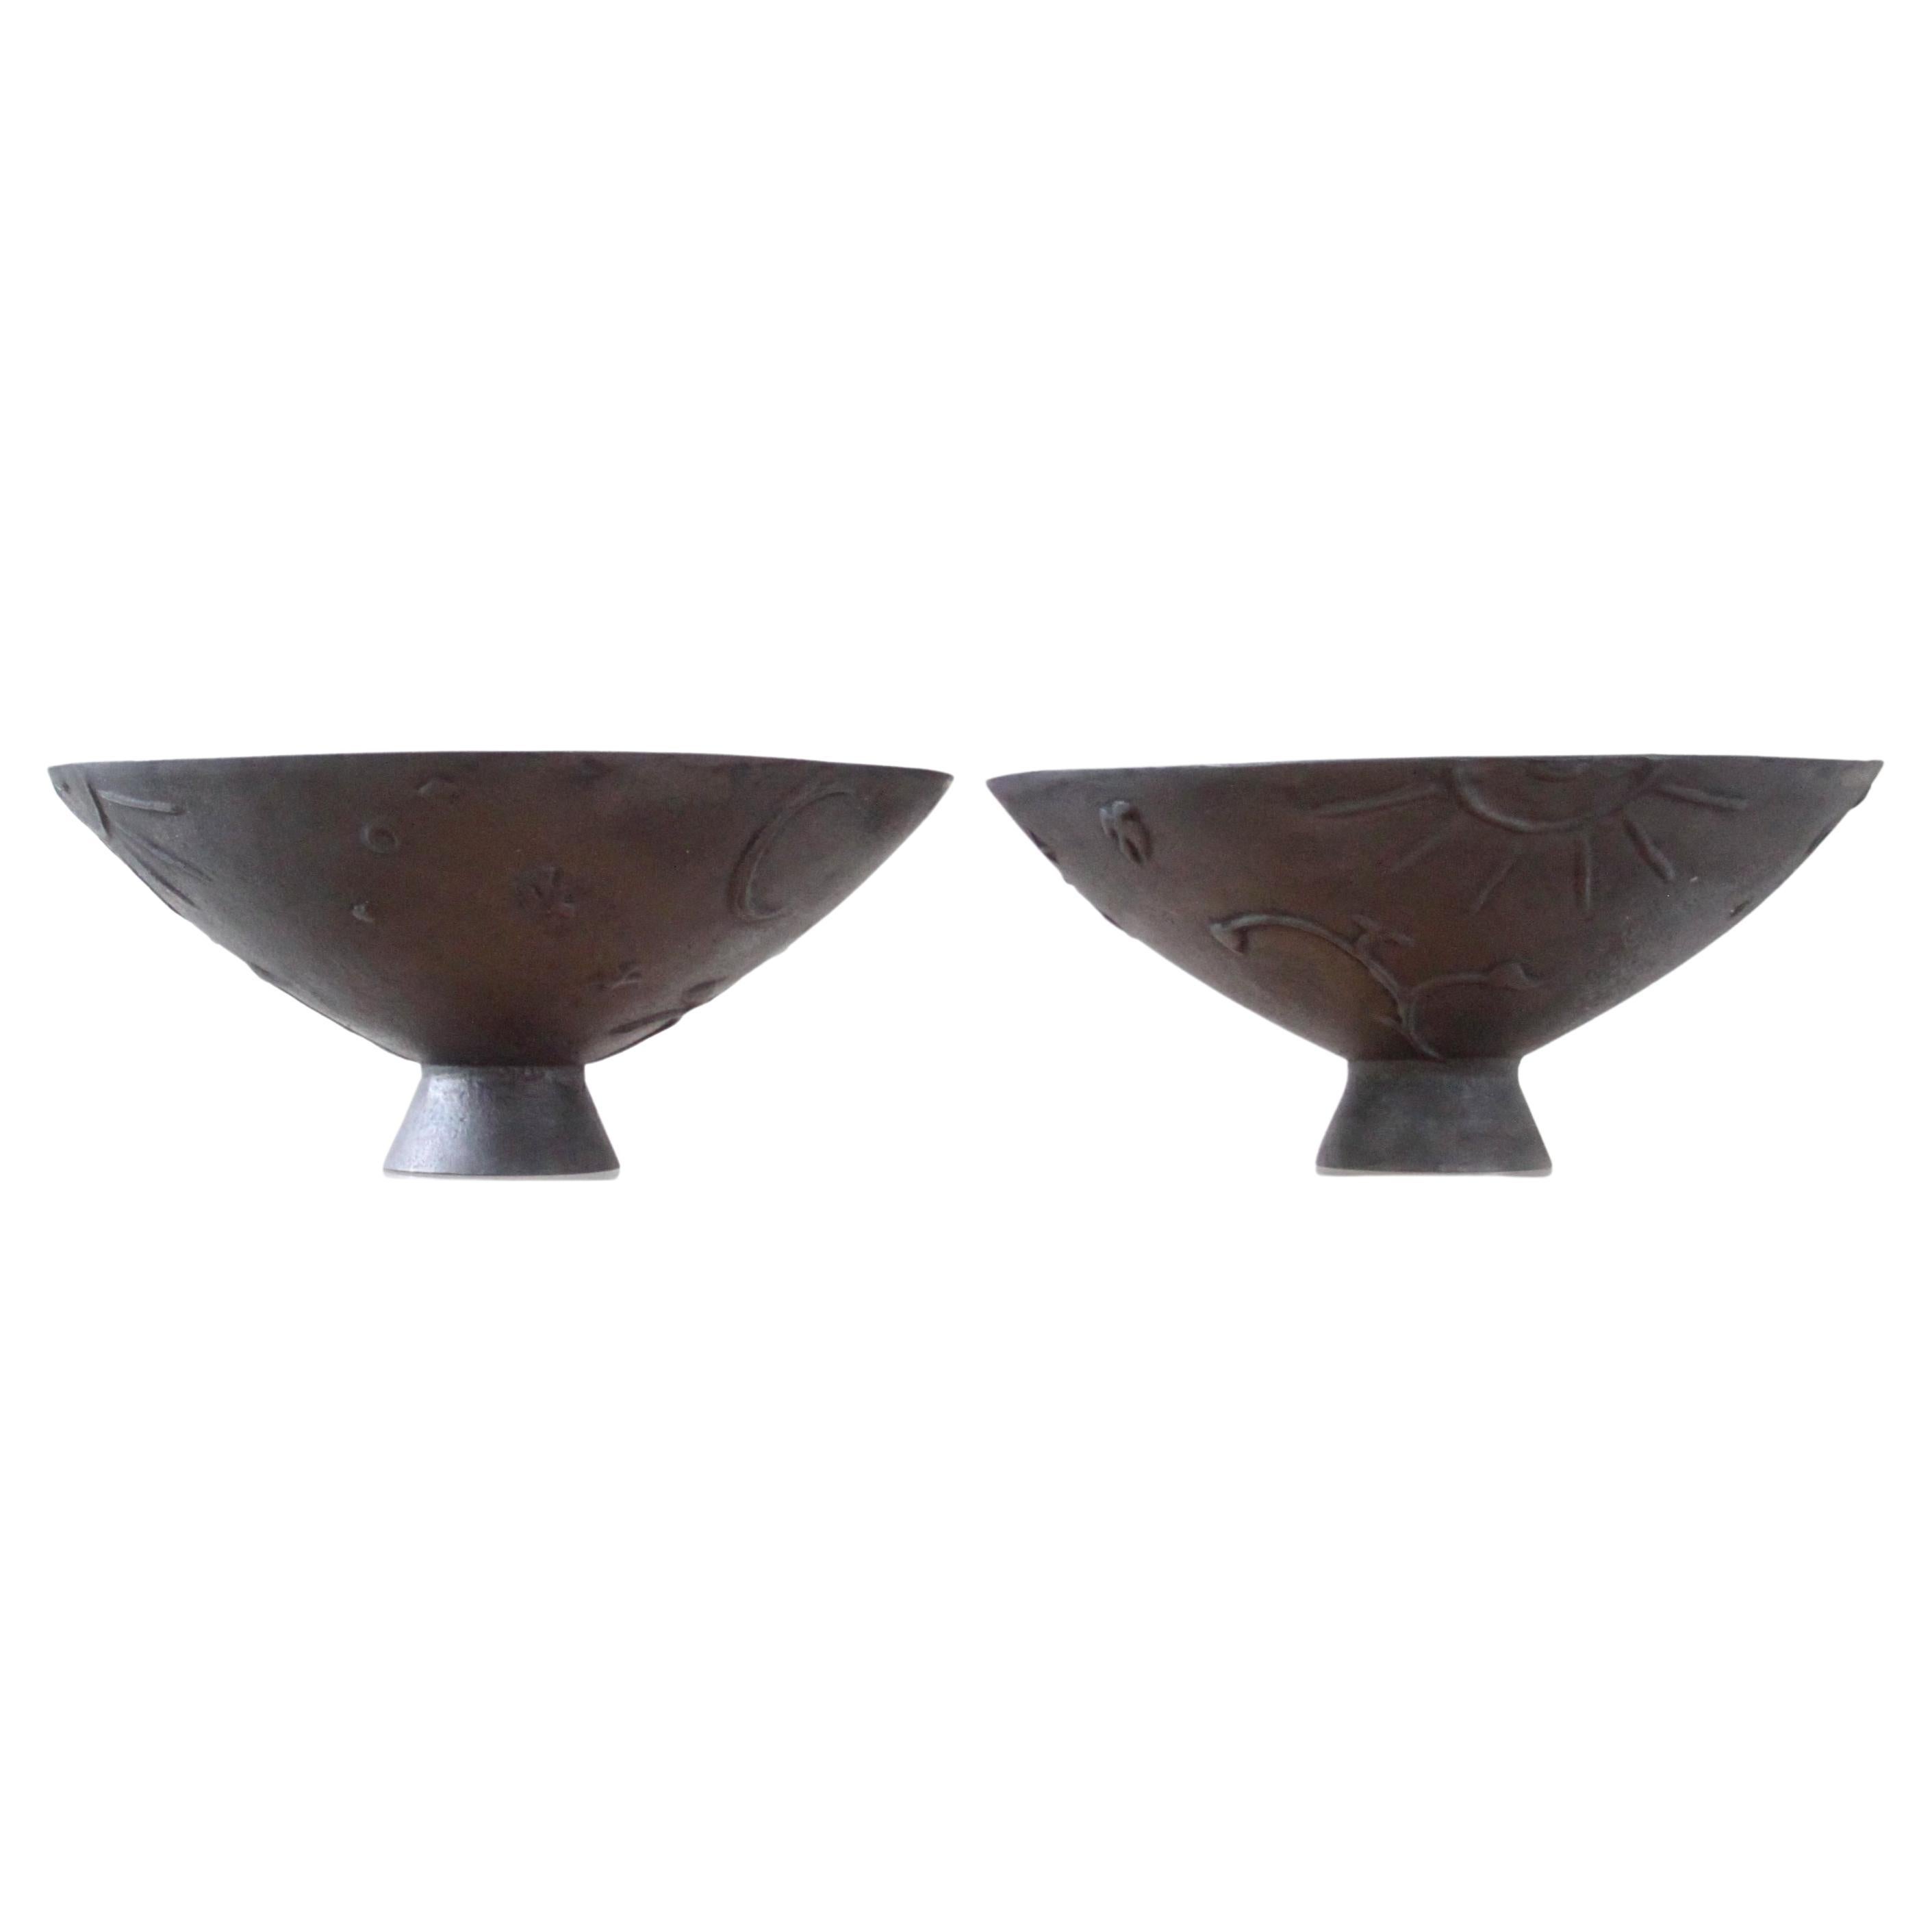 Pair of Cast Iron Urns by Olof Hult Scandinavian Modern For Sale